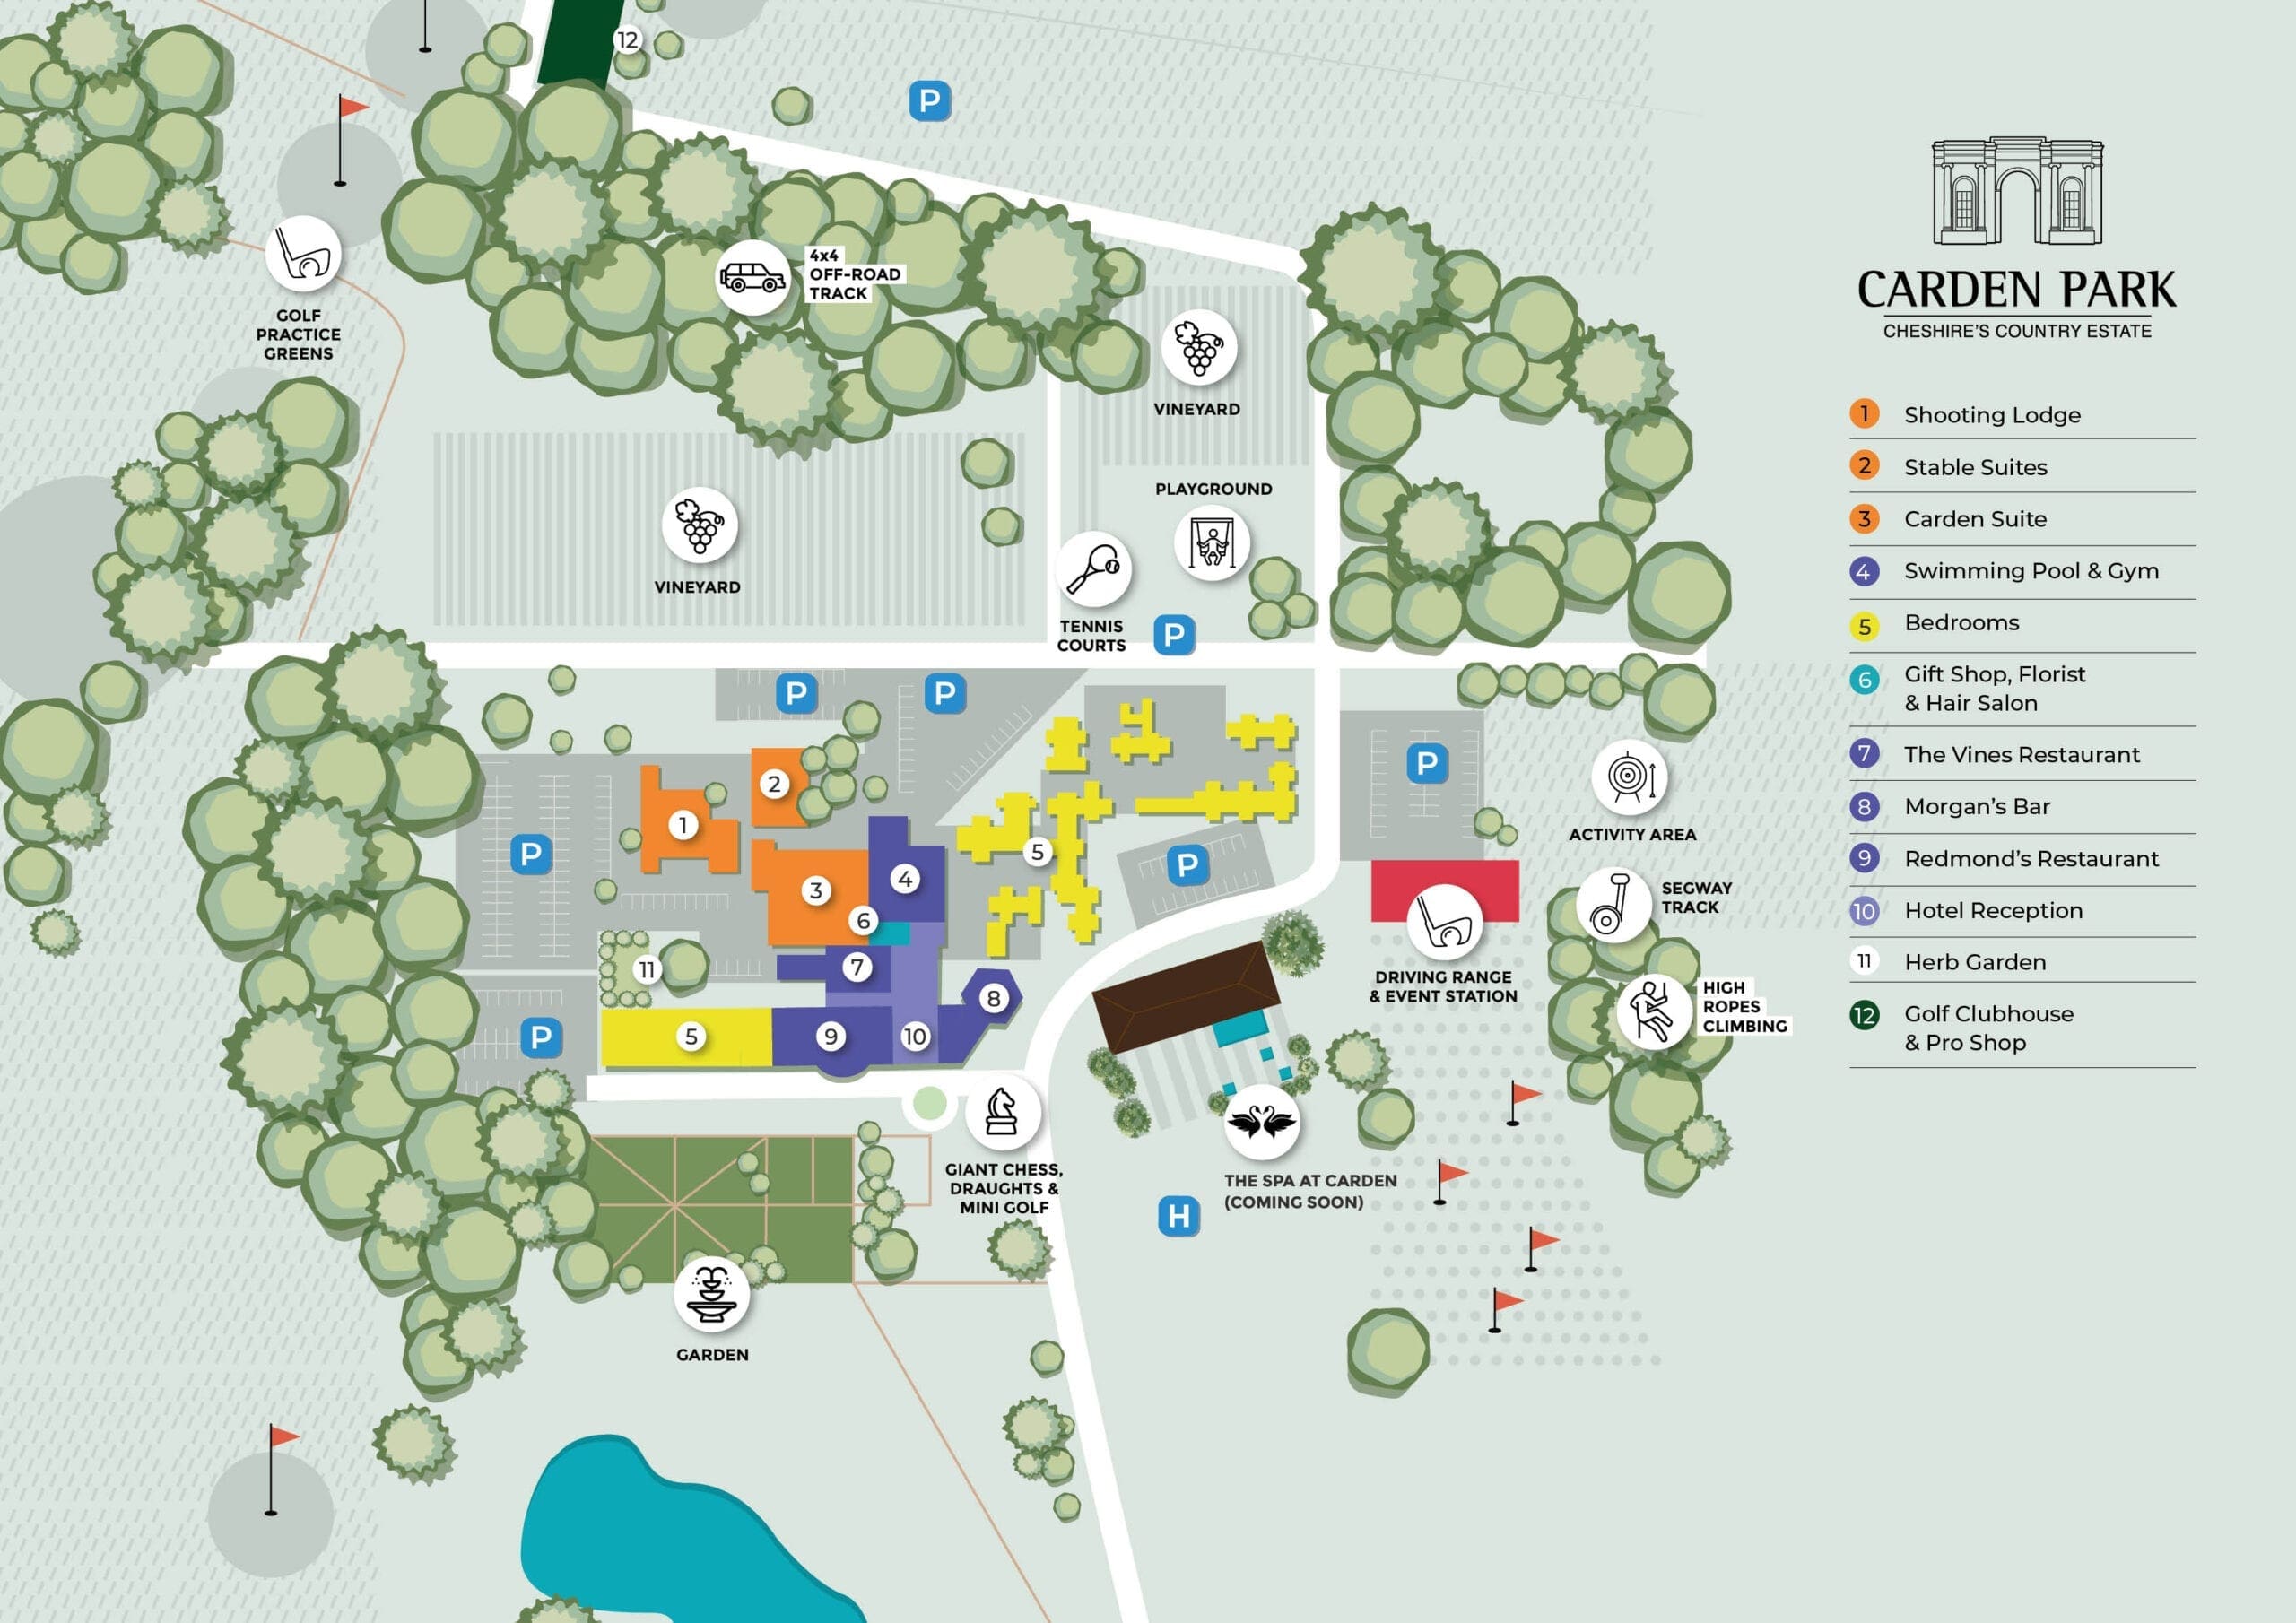 Carden Park country estate map 